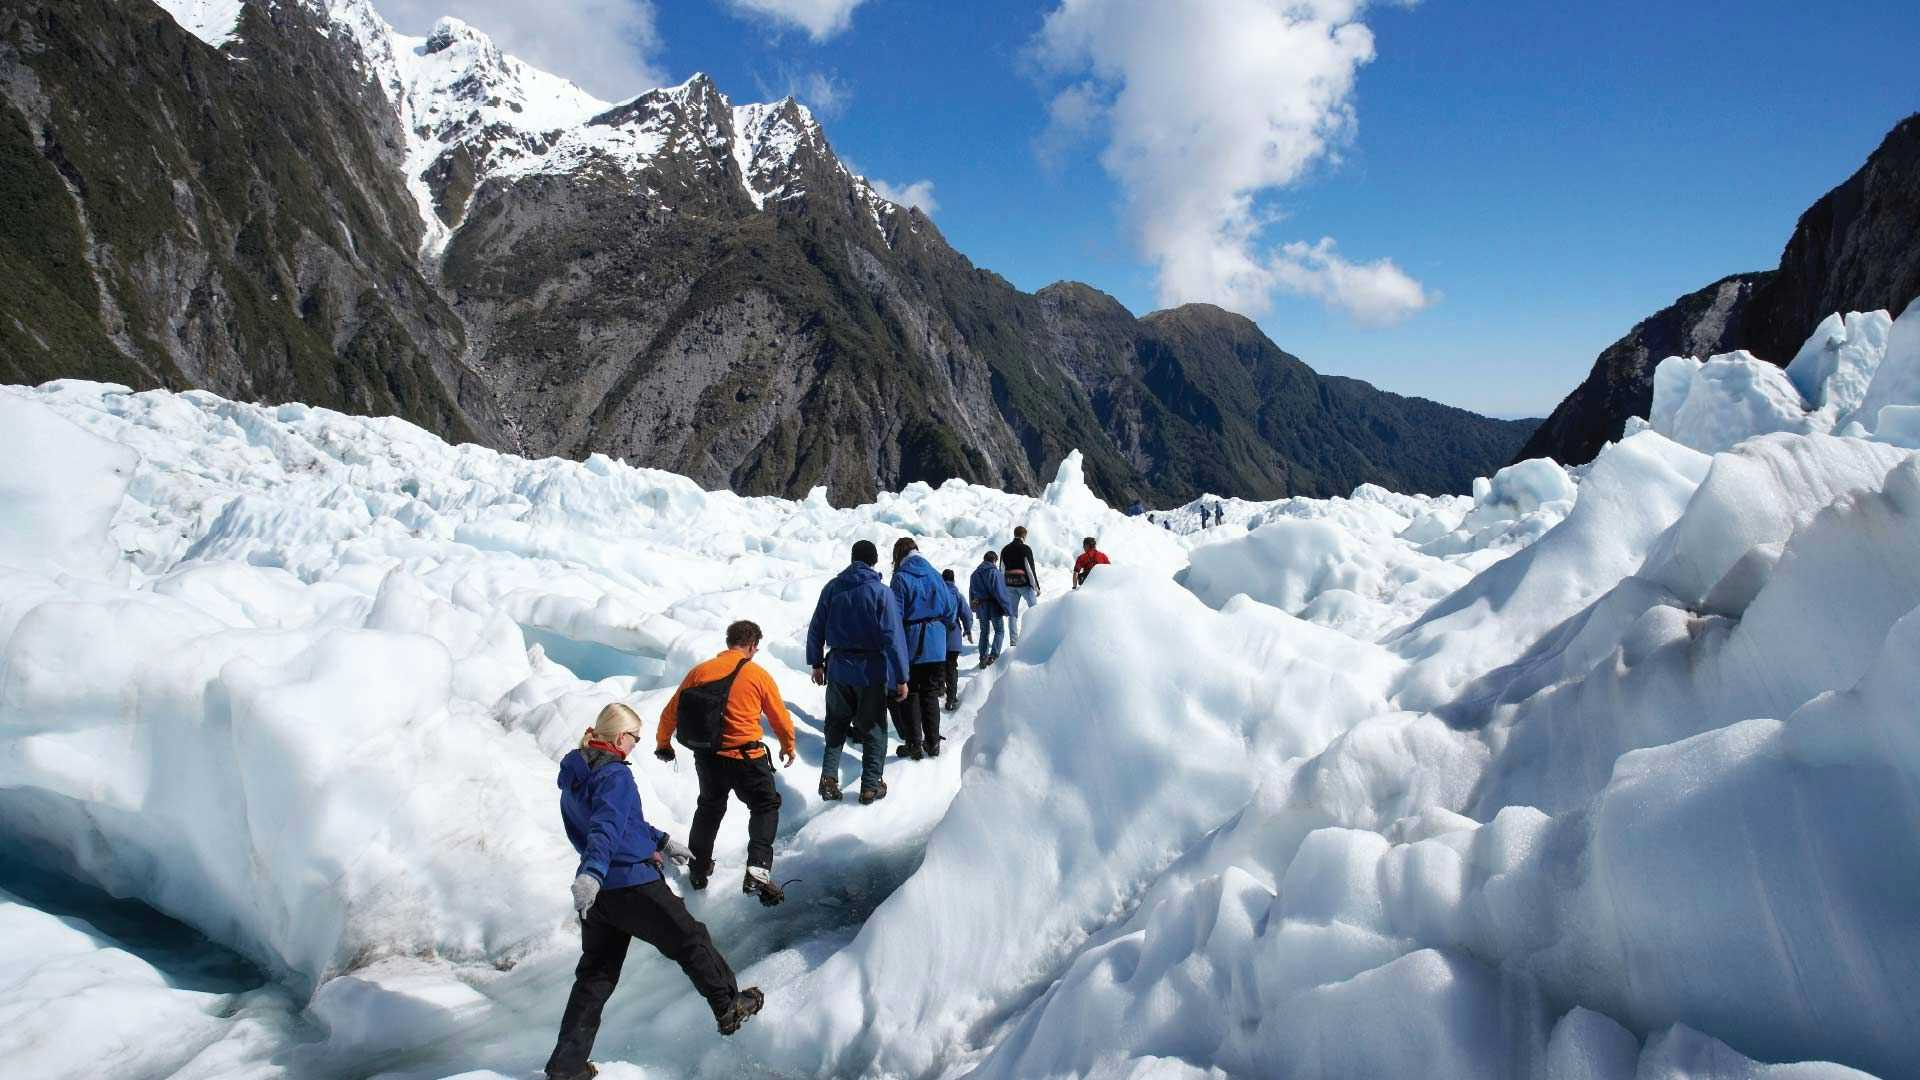 Group of people hiking up Franz Josef Glacier in New Zealand